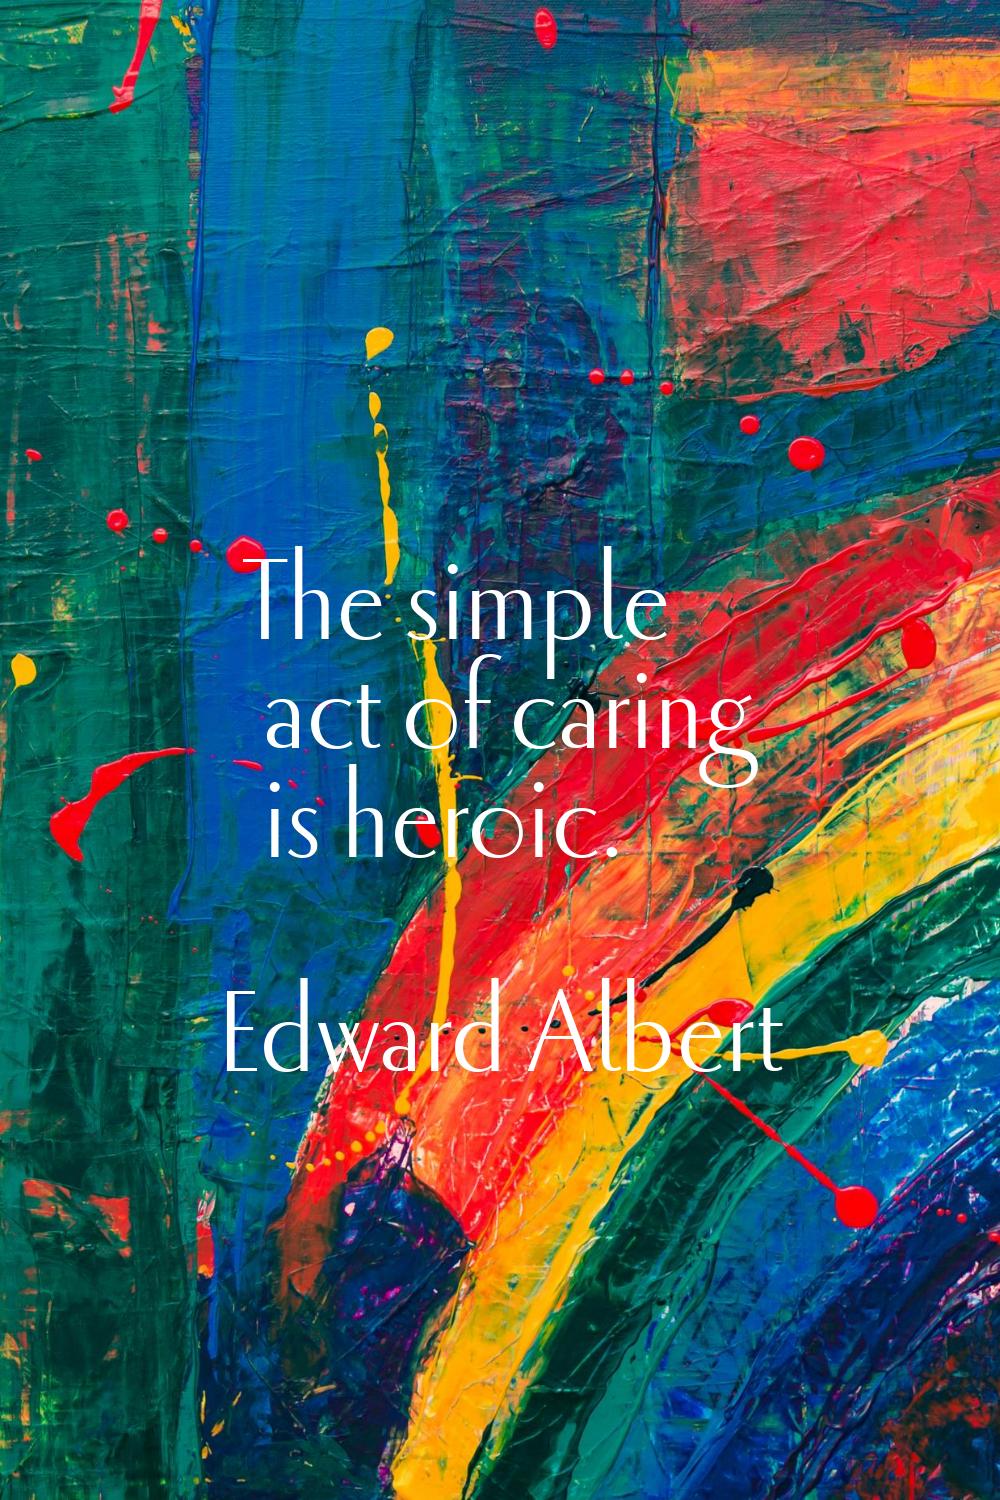 The simple act of caring is heroic.